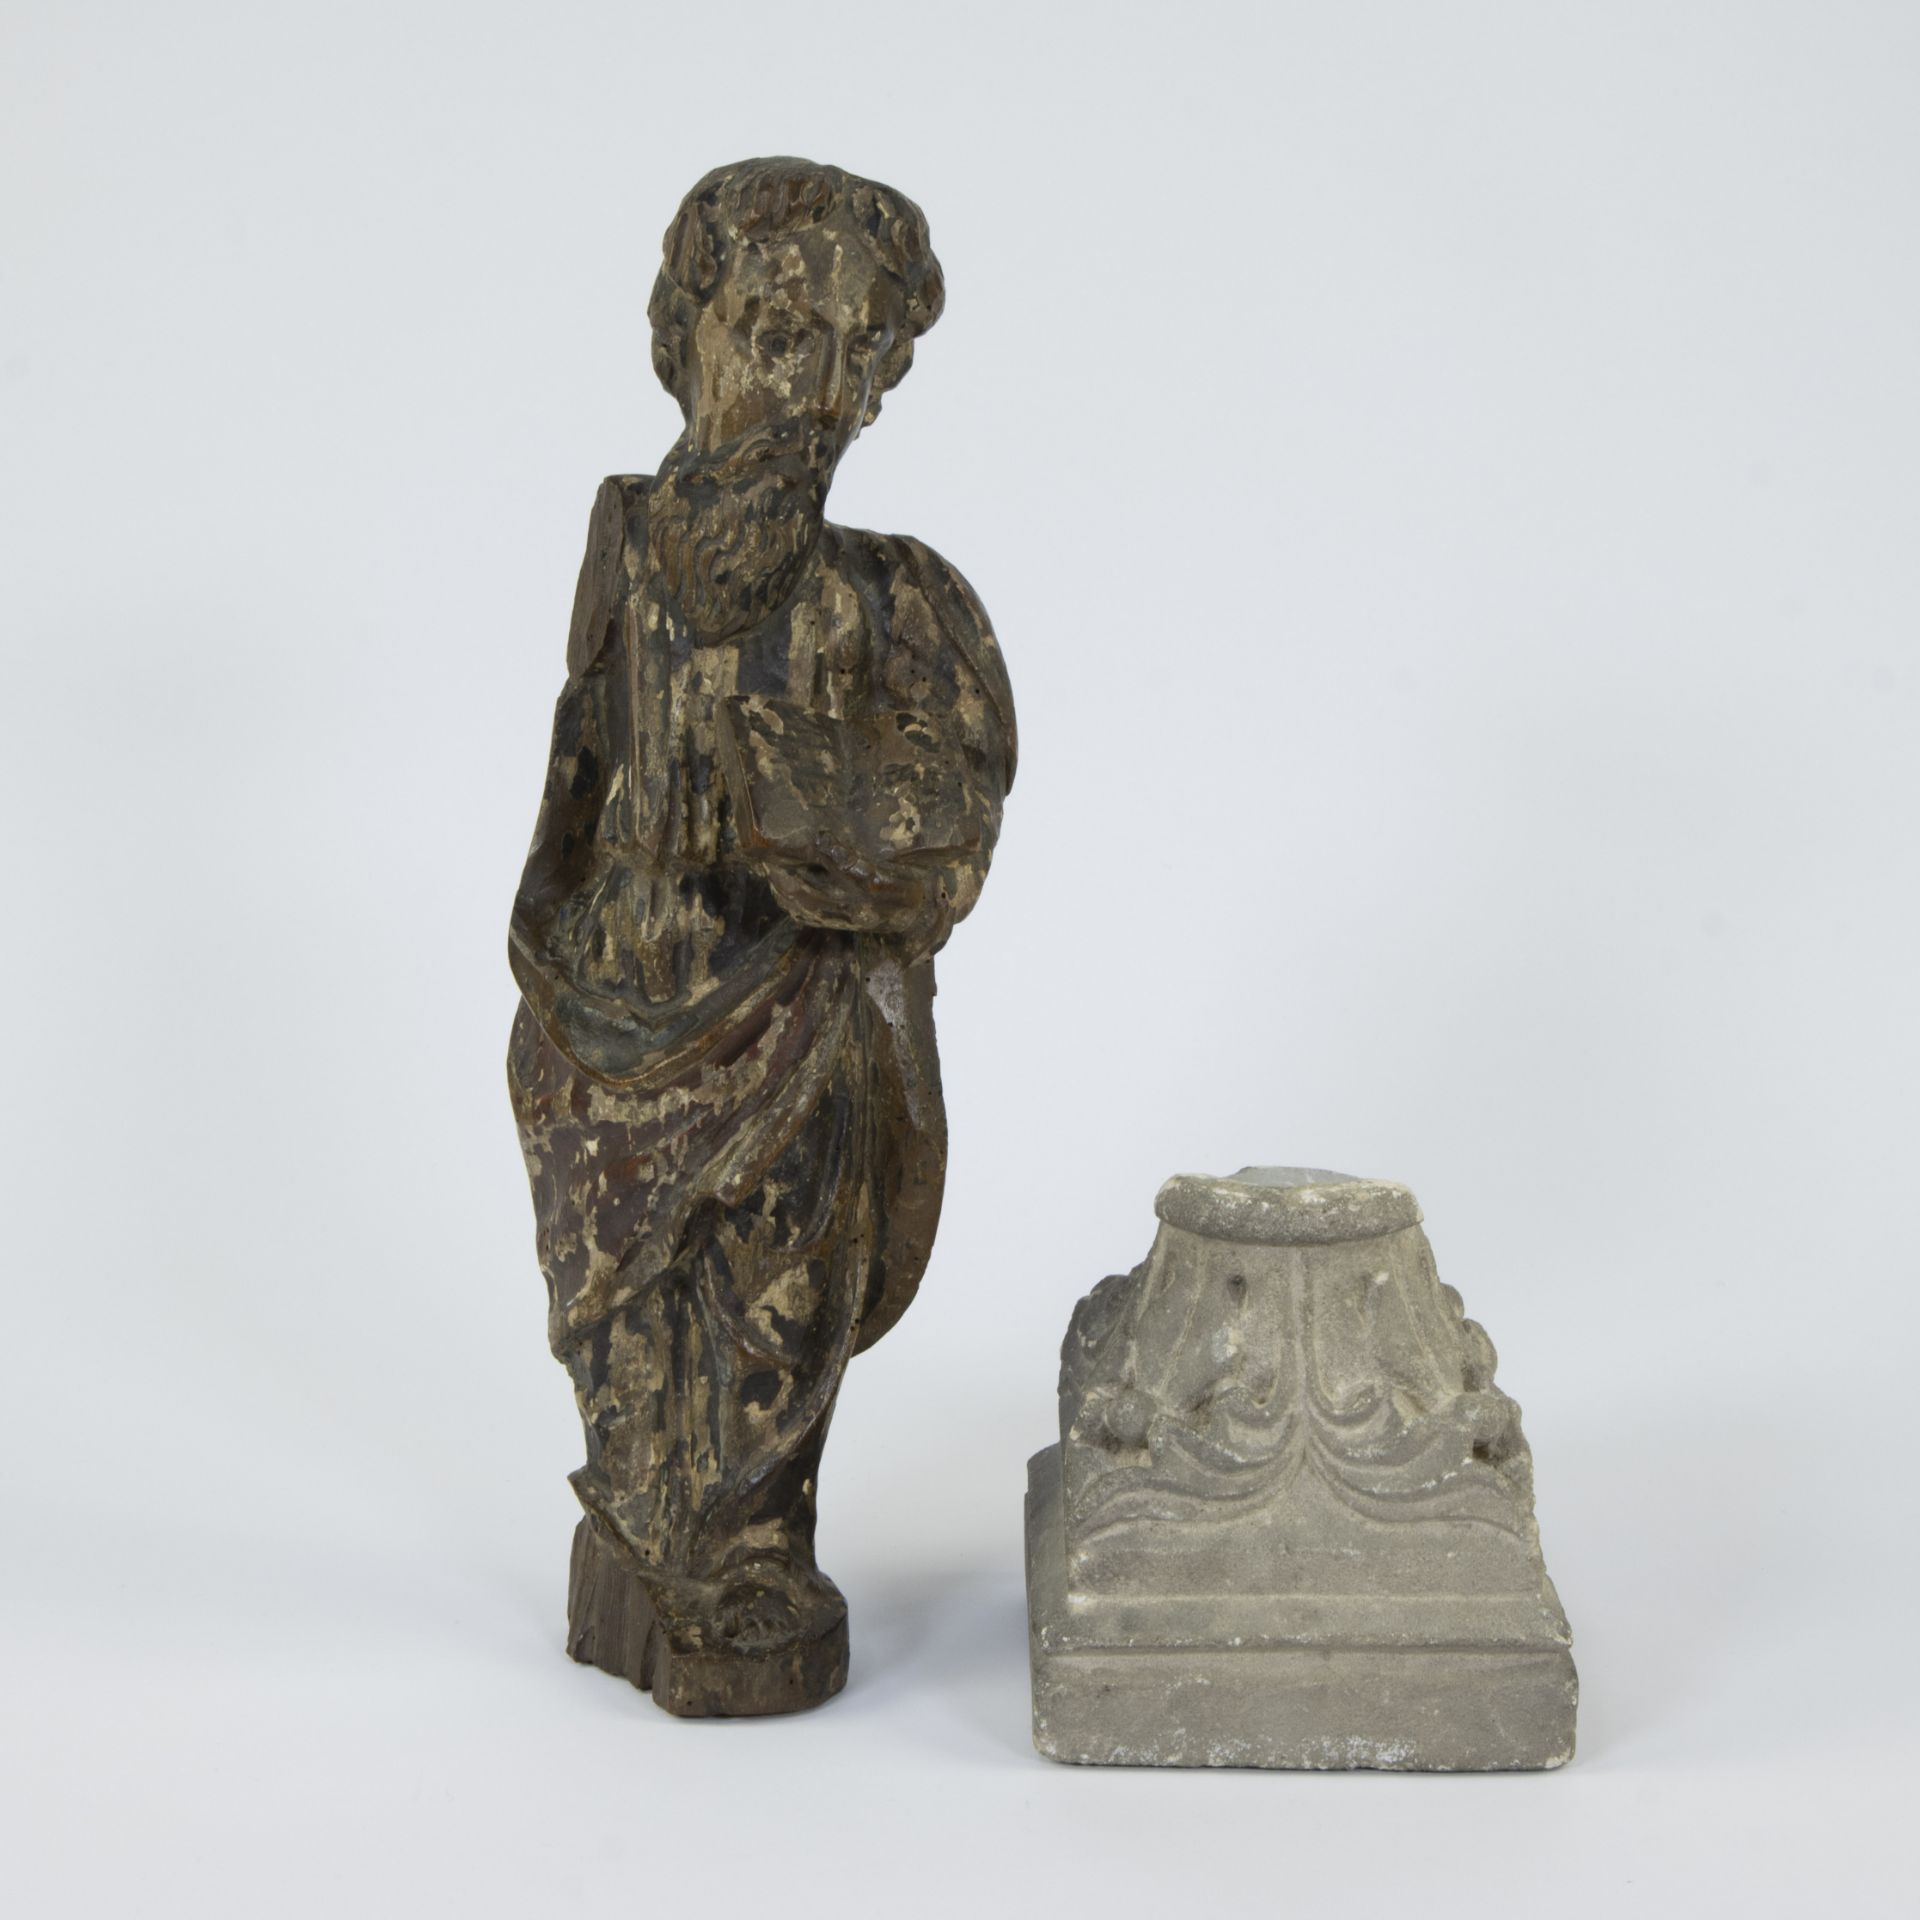 Wooden statue of an evangelist with polychromy, 19th century and capital of a column